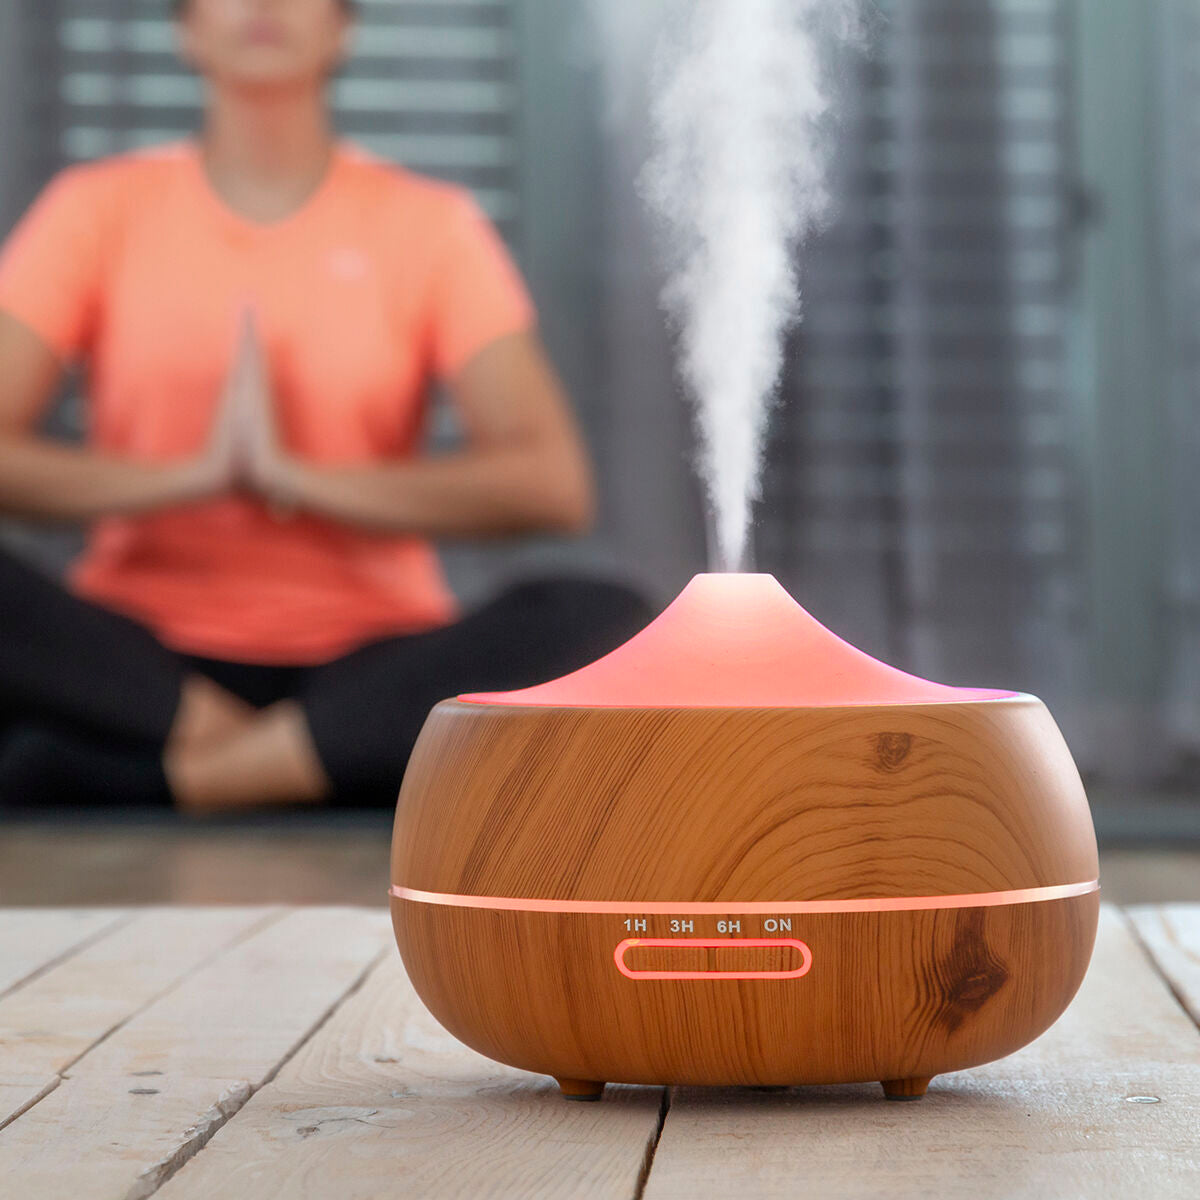 Kaufe Luftbefeuchter Aroma Diffusor Multicolor-LED Wooden-Effect InnovaGoods bei AWK Flagship um € 46.00